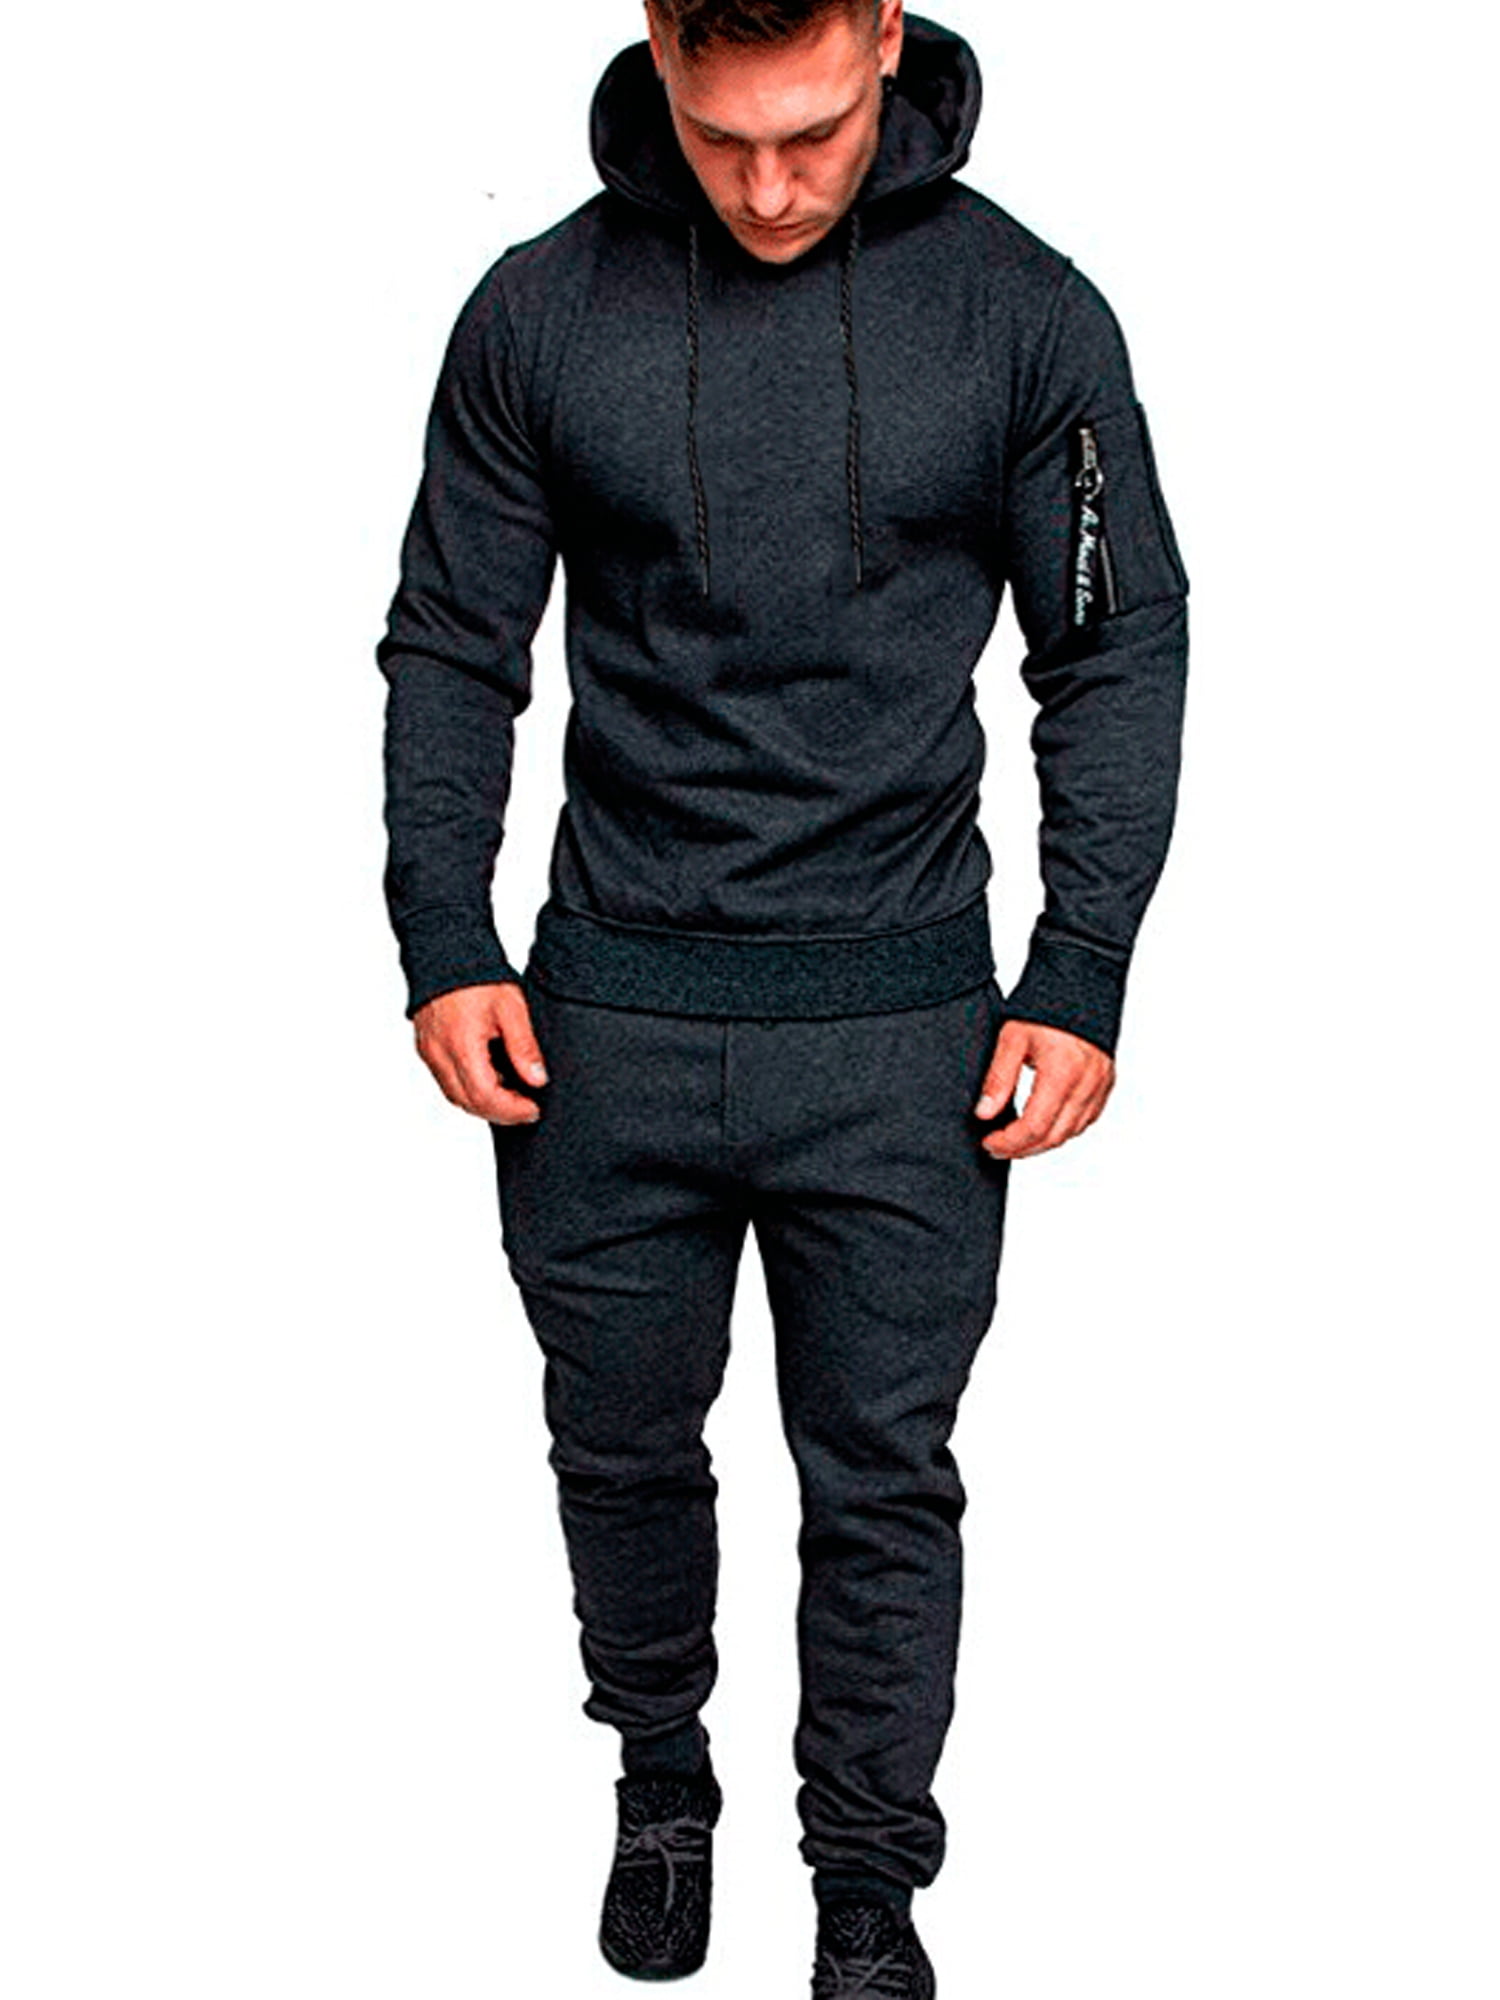 TUVEKE Sweat Suits For Men Set 2 Piece Hoodie Jogger Long Sleeve Sweatsuits  Hoodie and Pants Size S To 2XL